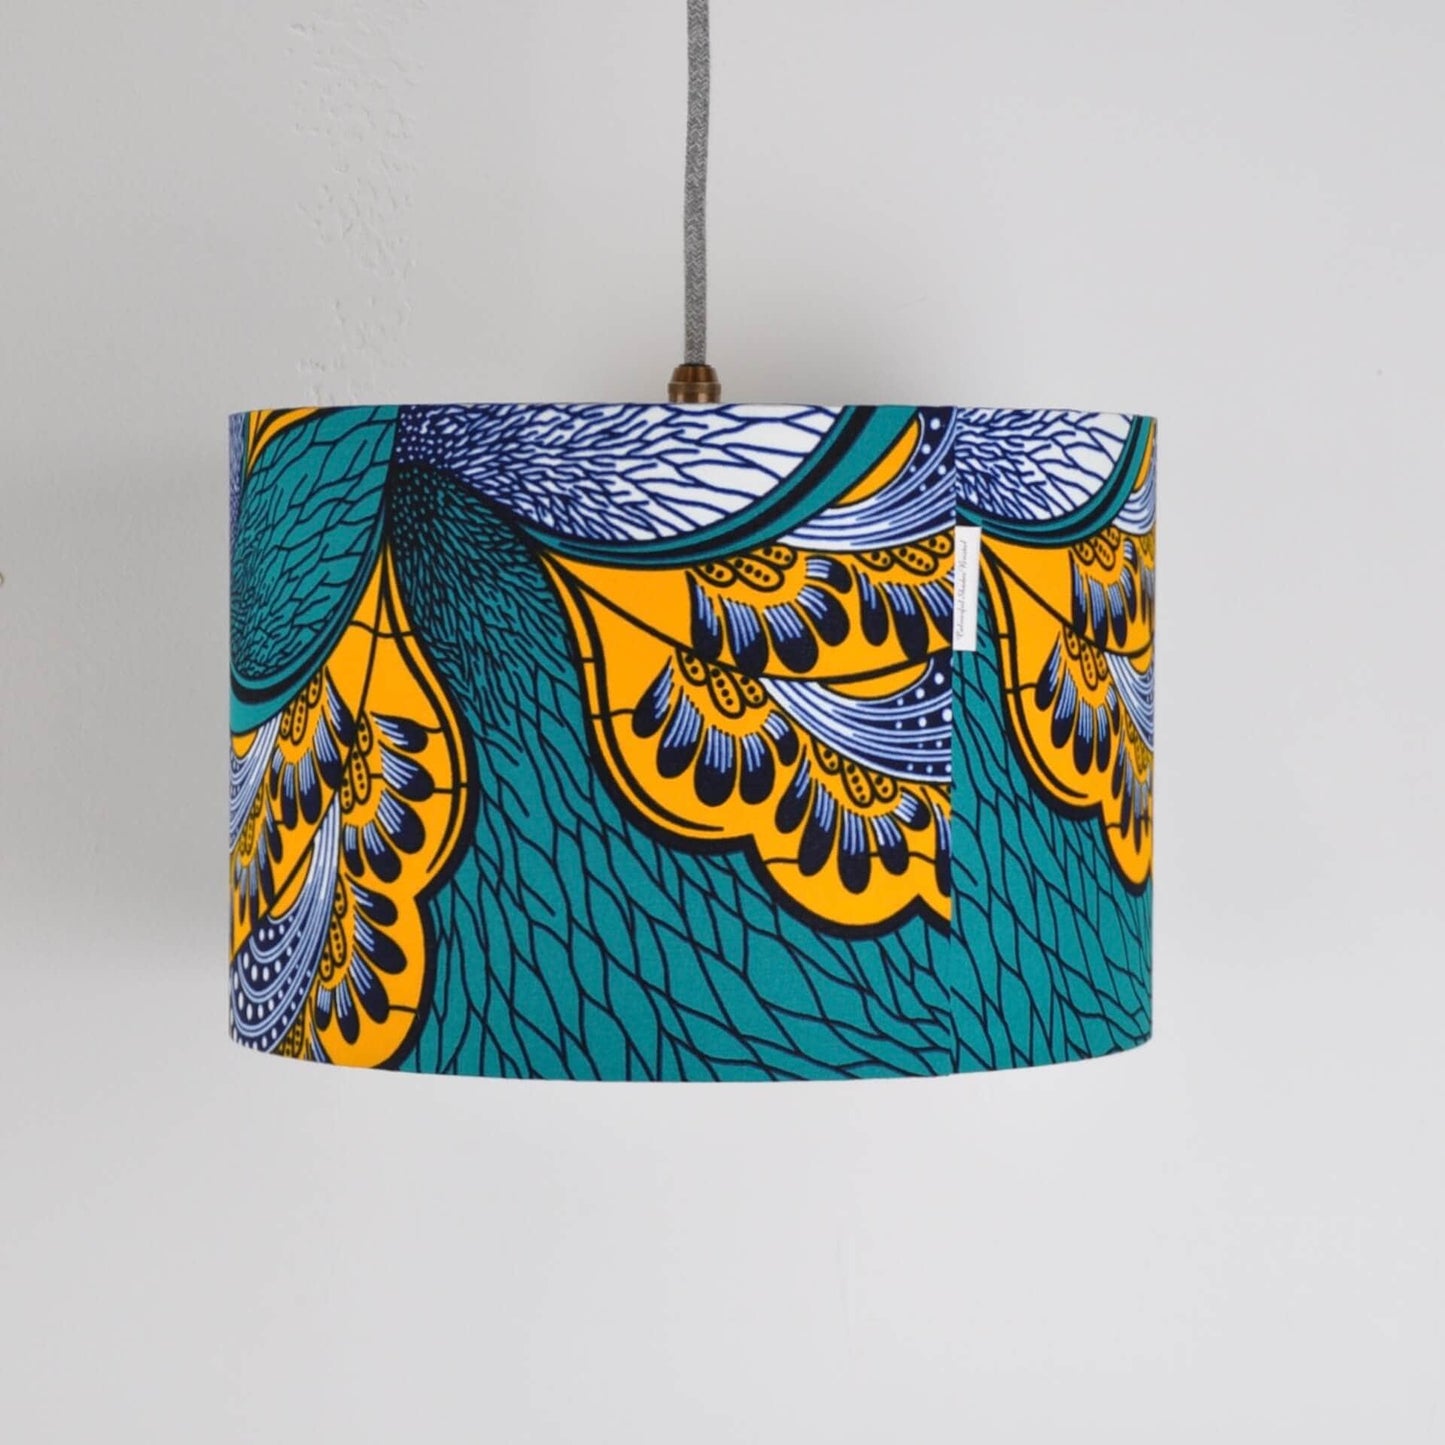 Colourful Shadez Bristol ⌀ 30cm x H20cm African Print Lampshade - Teal & Yellow Peacock Feather (various sizes)